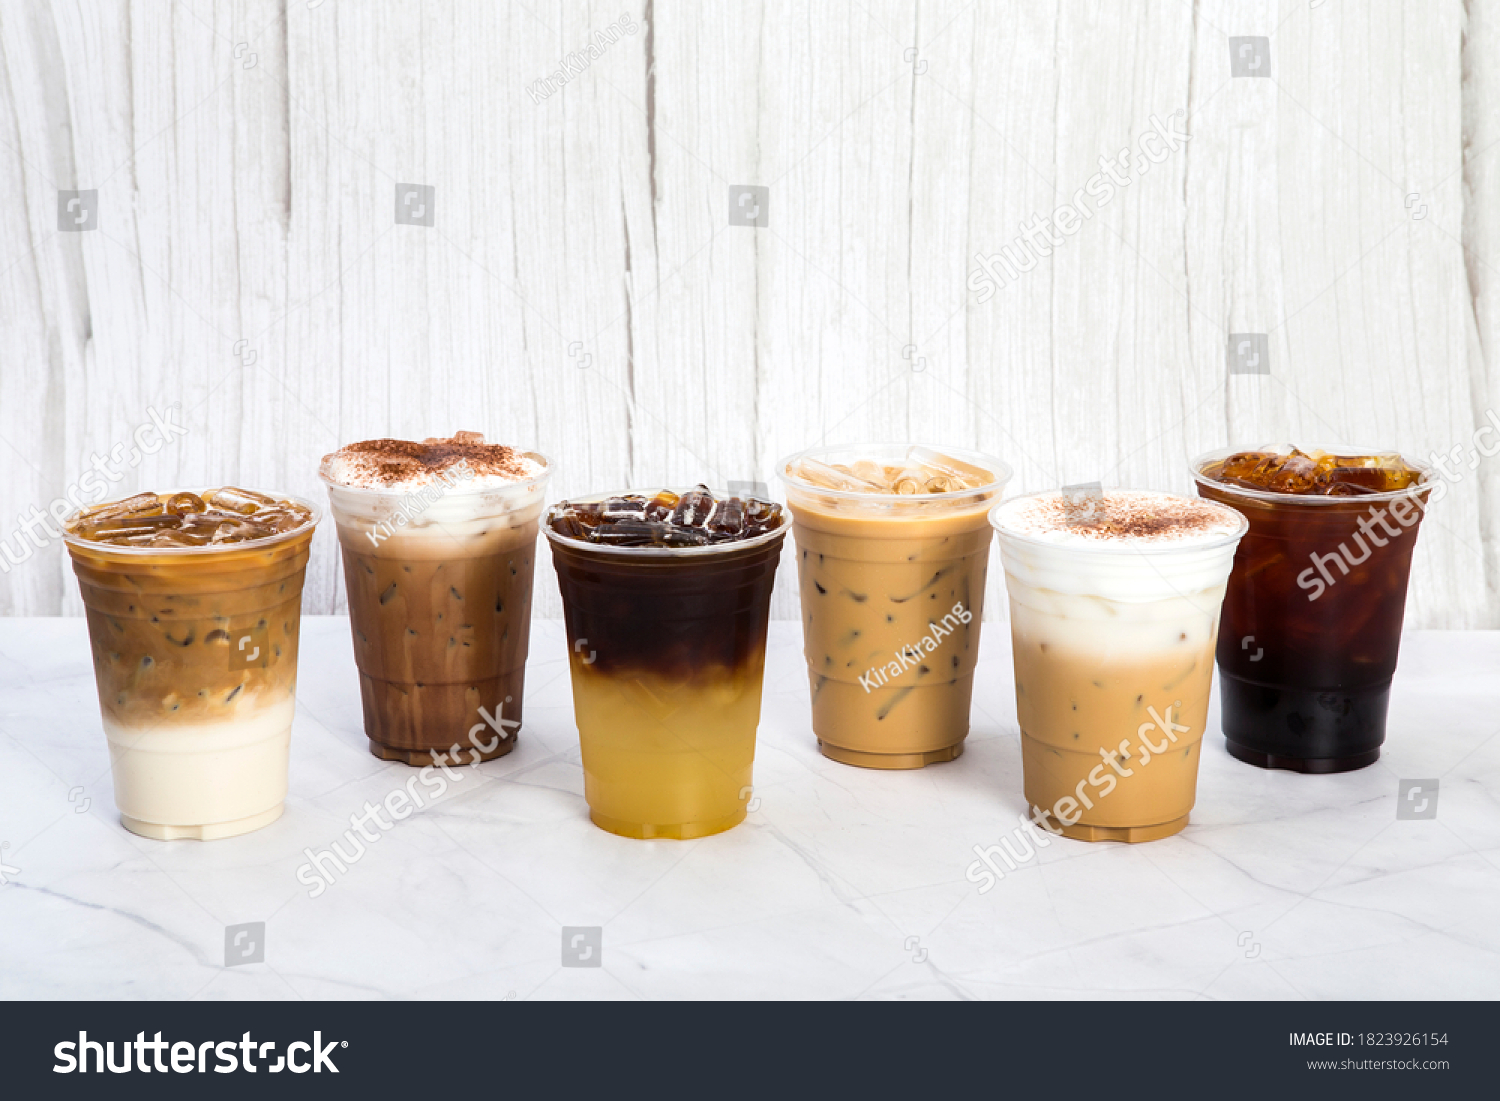 group of iced coffee in plastic glass latte mocha yuzu espresso cappuccino americano are arranging in white and clear wooden background #1823926154